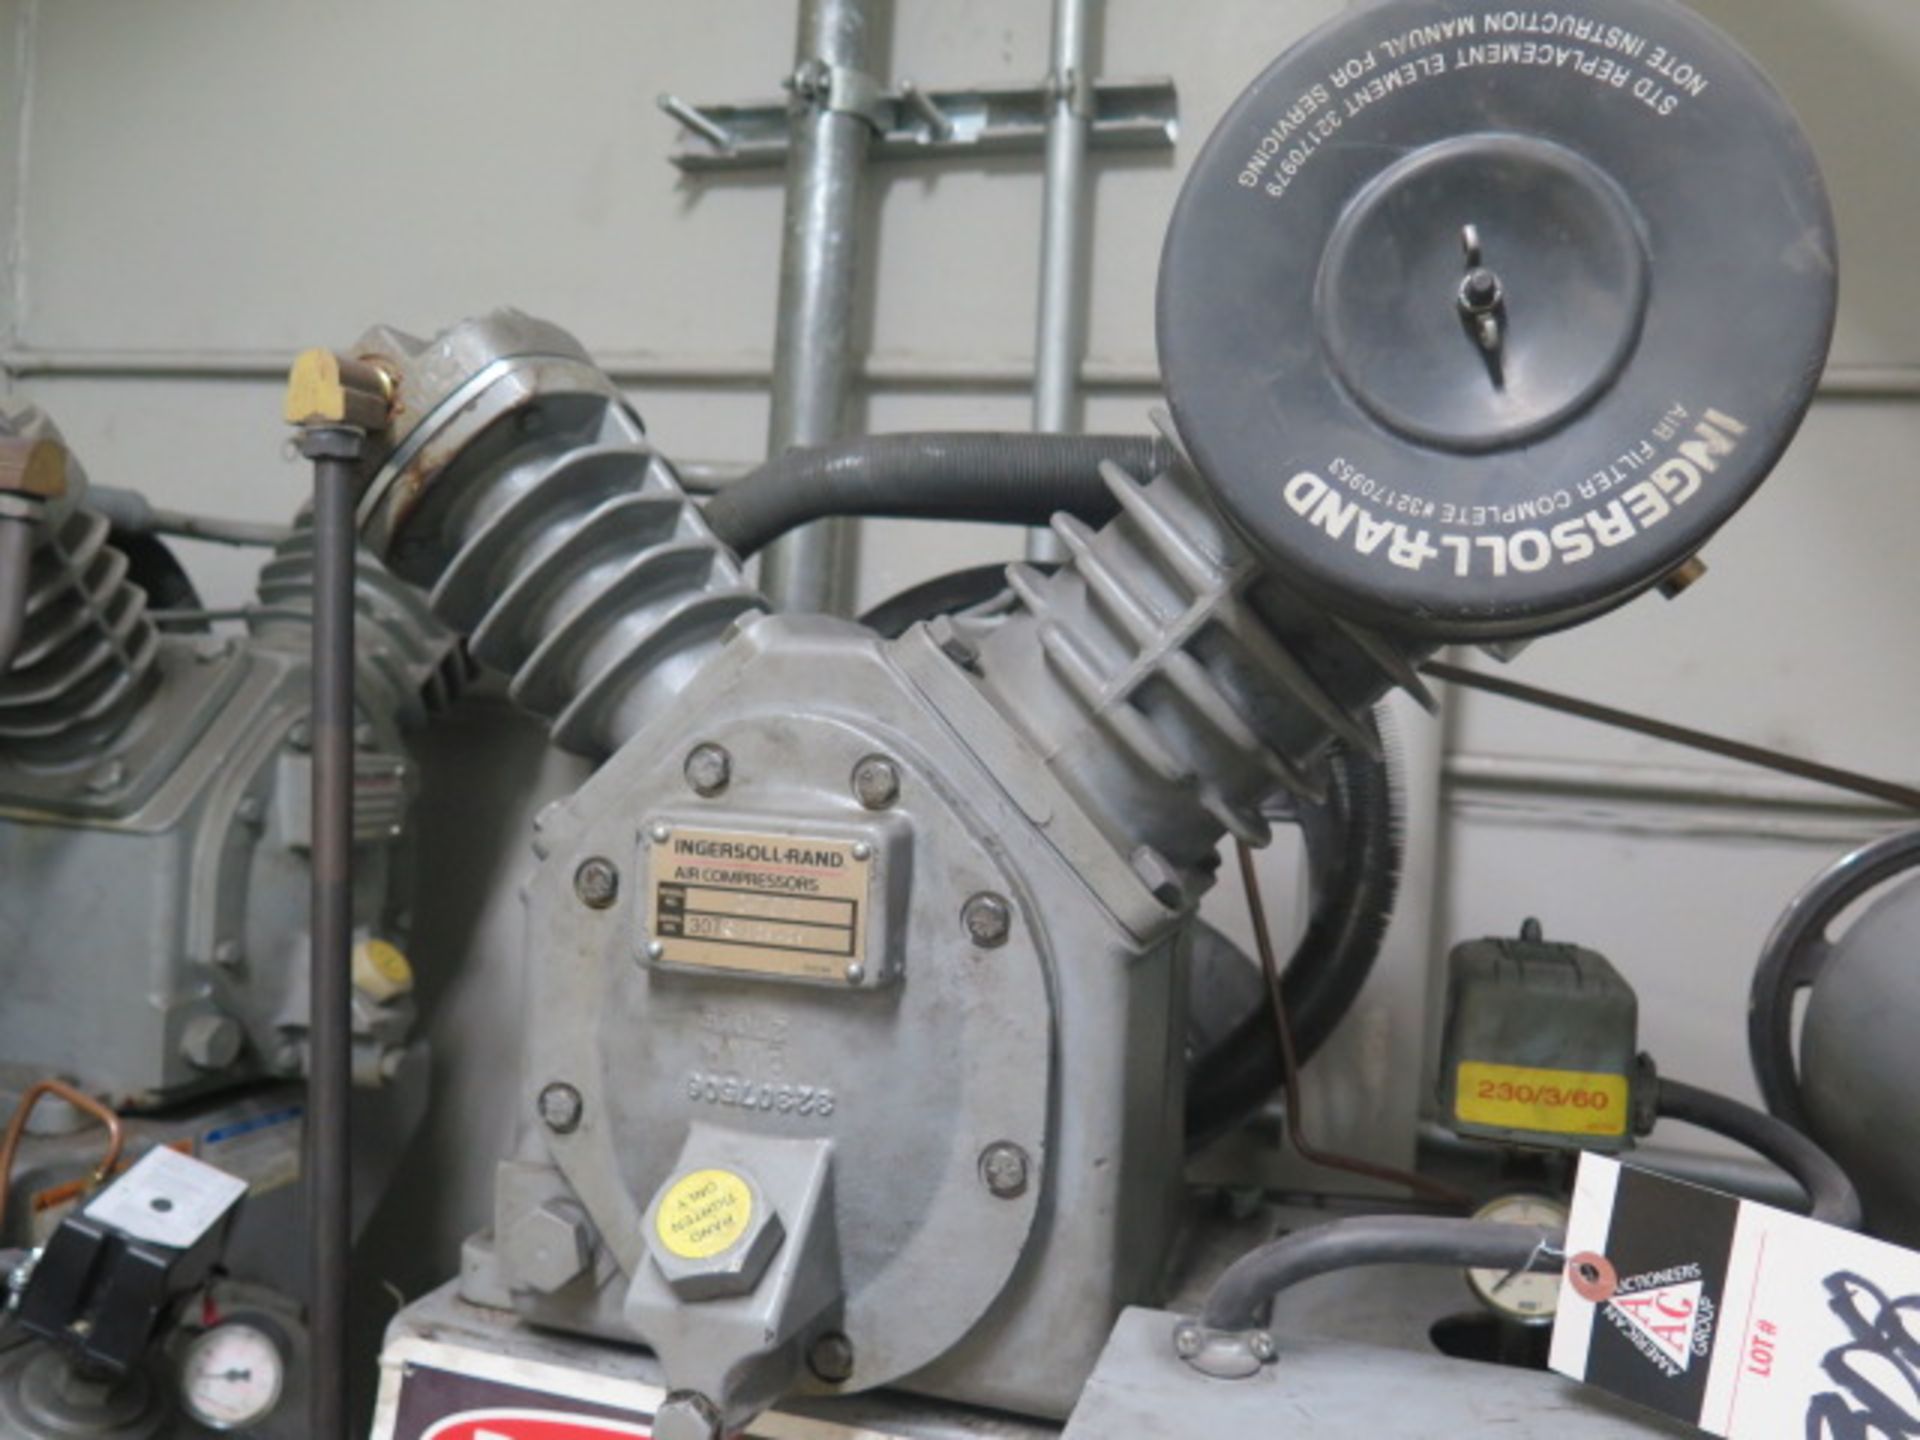 Ingersoll Rand T30 7.5Hp Vertical Air Compressor w/ 2-Stage Pump, 80 Gallon Tank - Image 2 of 5